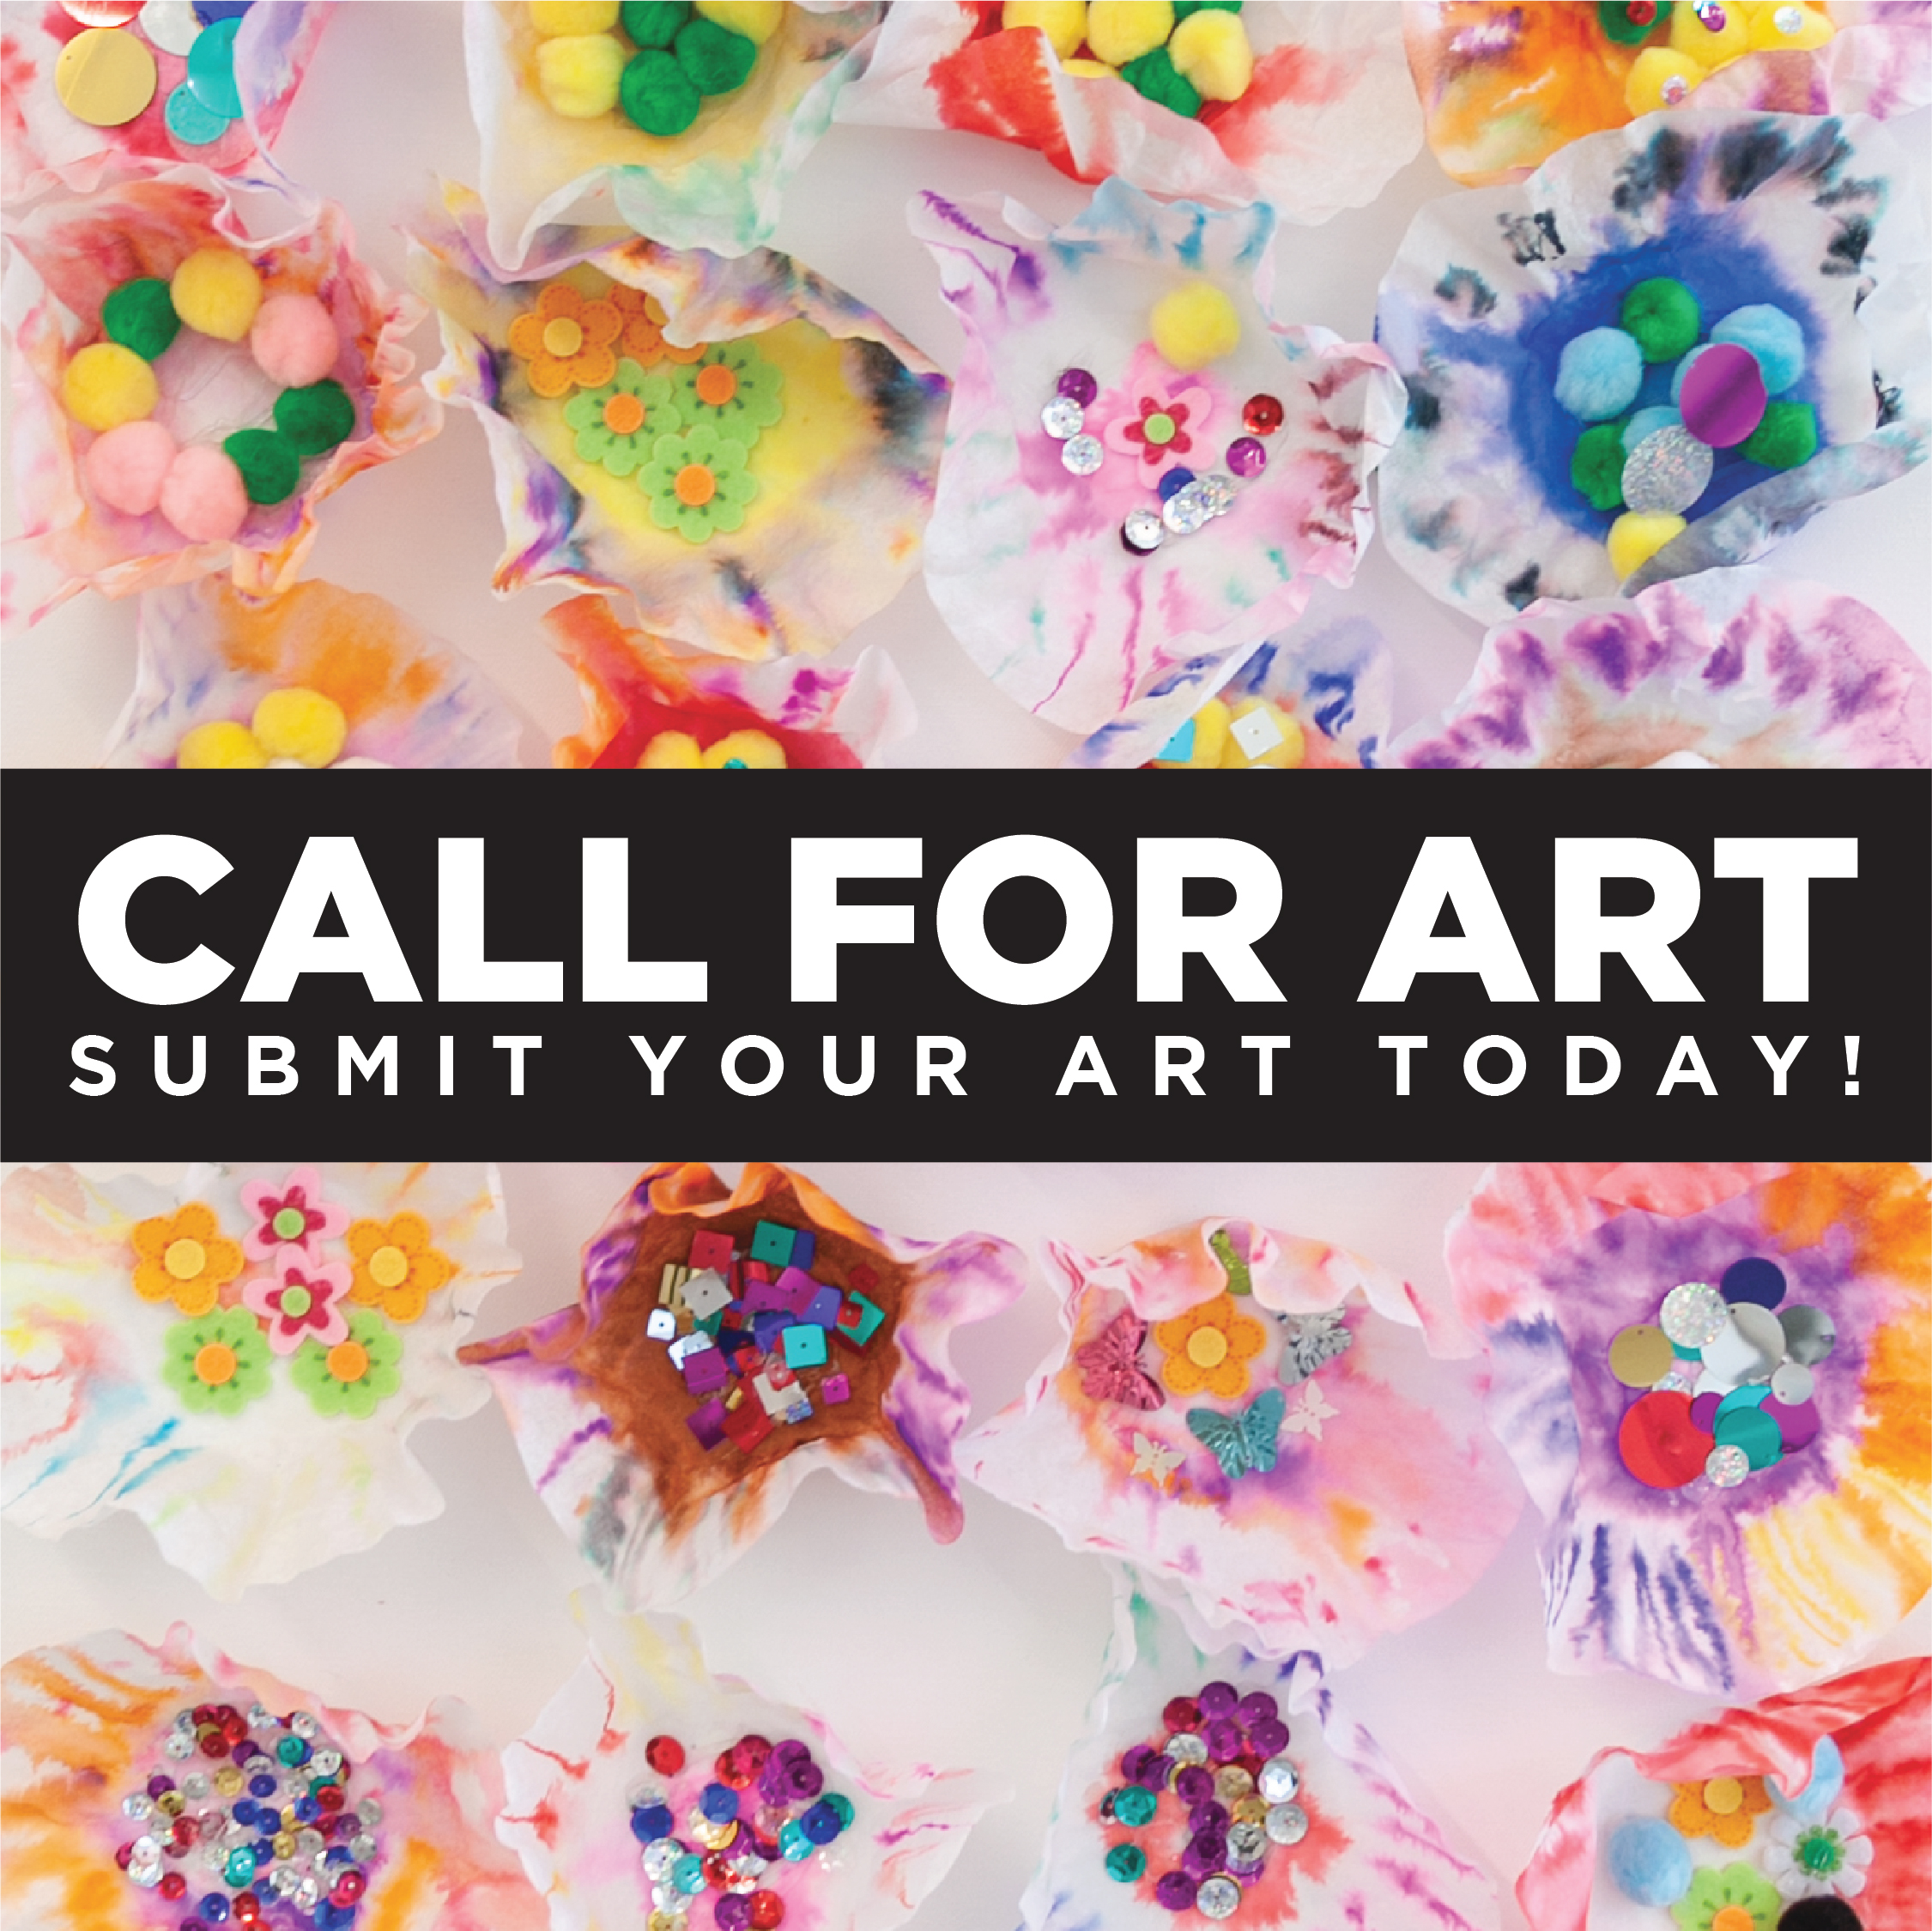 Background photo of artwork with colorful coffee filters and various objects like glitter and pom-poms with text overlay, "Call for art. submit your art today! Opportunities for exhibitions, workshops and more."